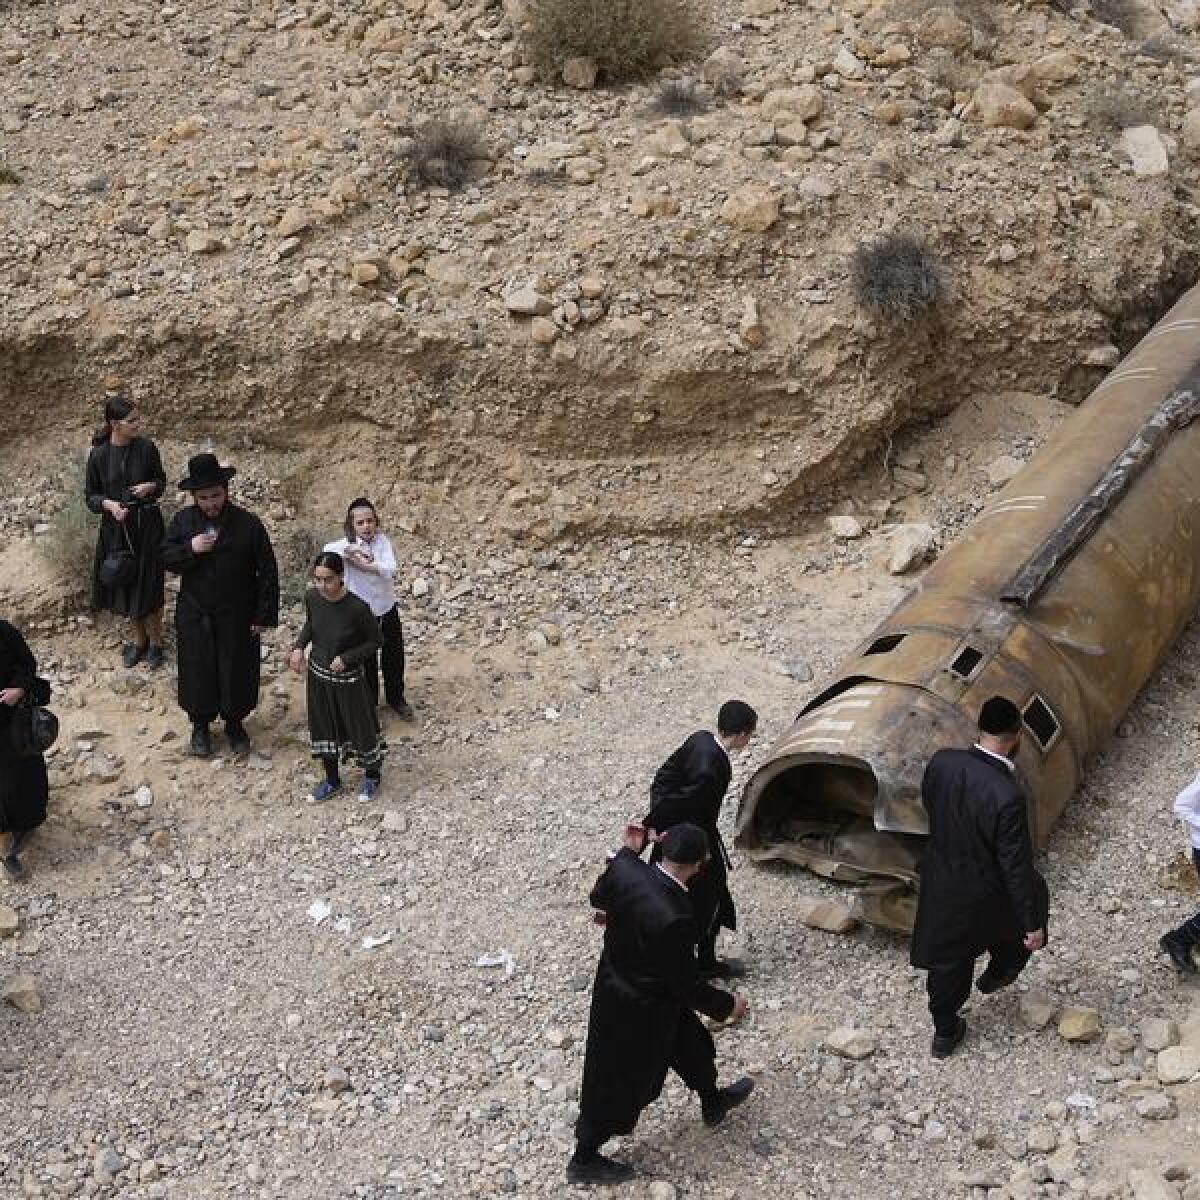 The remains of an intercepted Iranian missile in Israel.